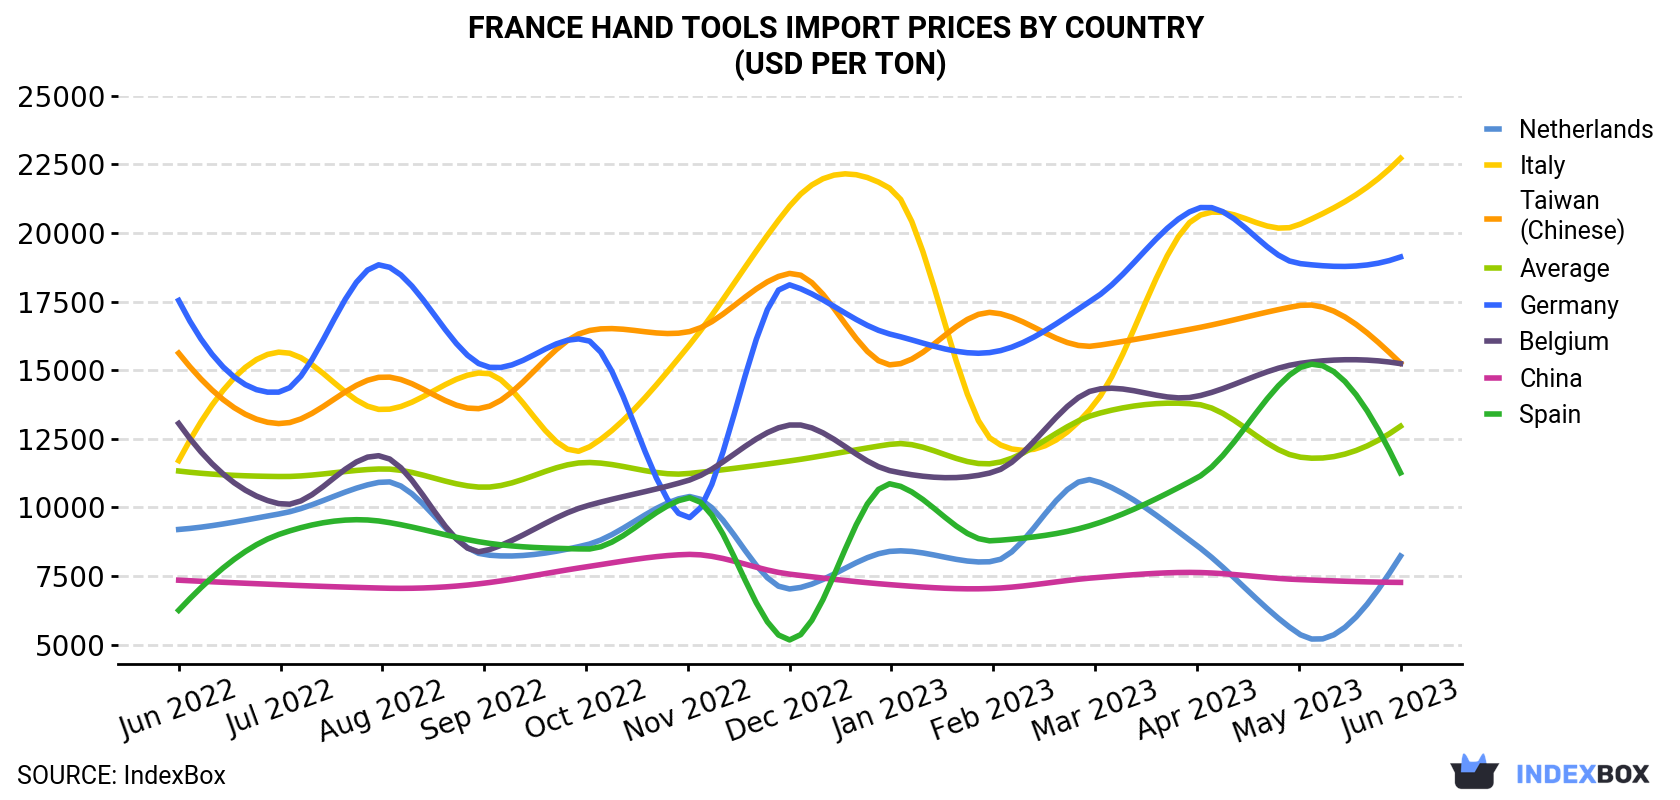 France Hand Tools Import Prices By Country (USD Per Ton)